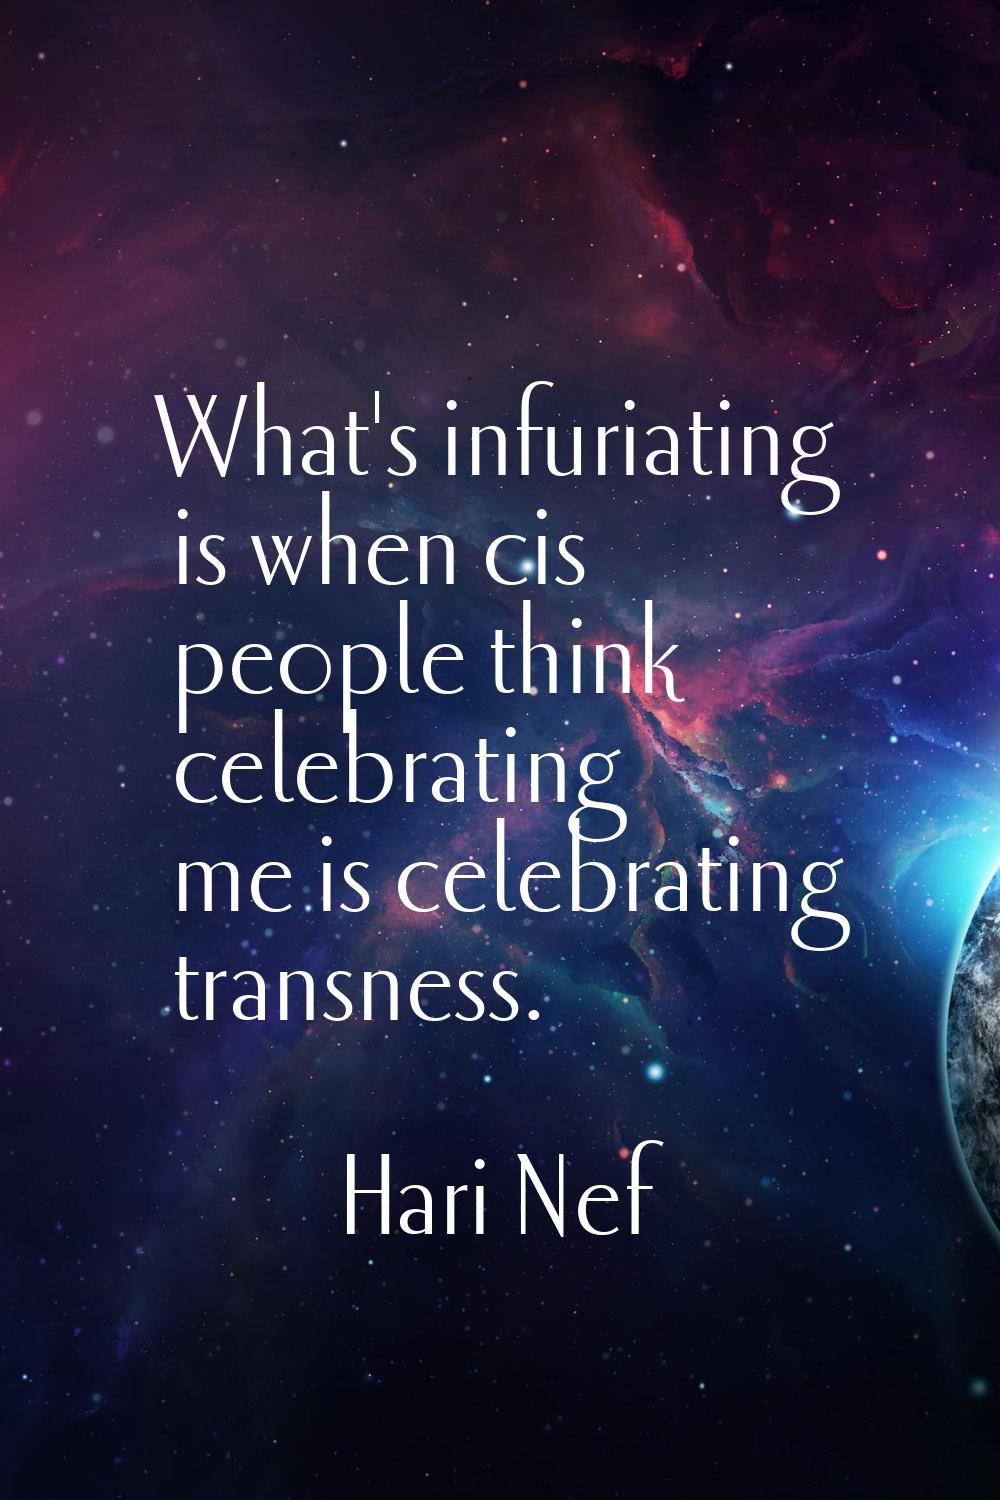 What's infuriating is when cis people think celebrating me is celebrating transness.